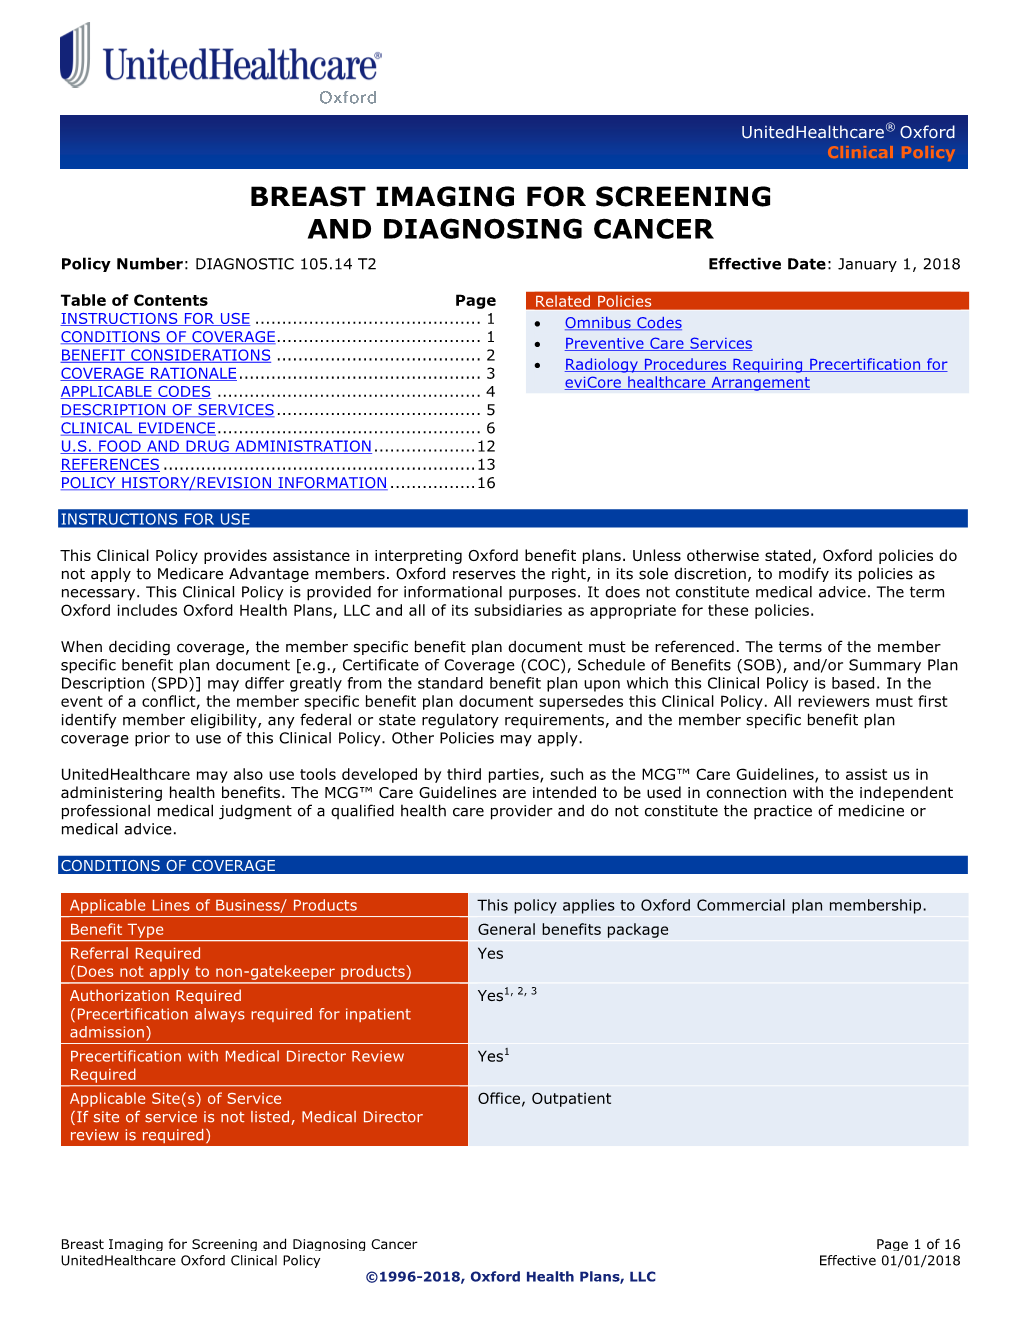 BREAST IMAGING for SCREENING and DIAGNOSING CANCER Policy Number: DIAGNOSTIC 105.14 T2 Effective Date: January 1, 2018